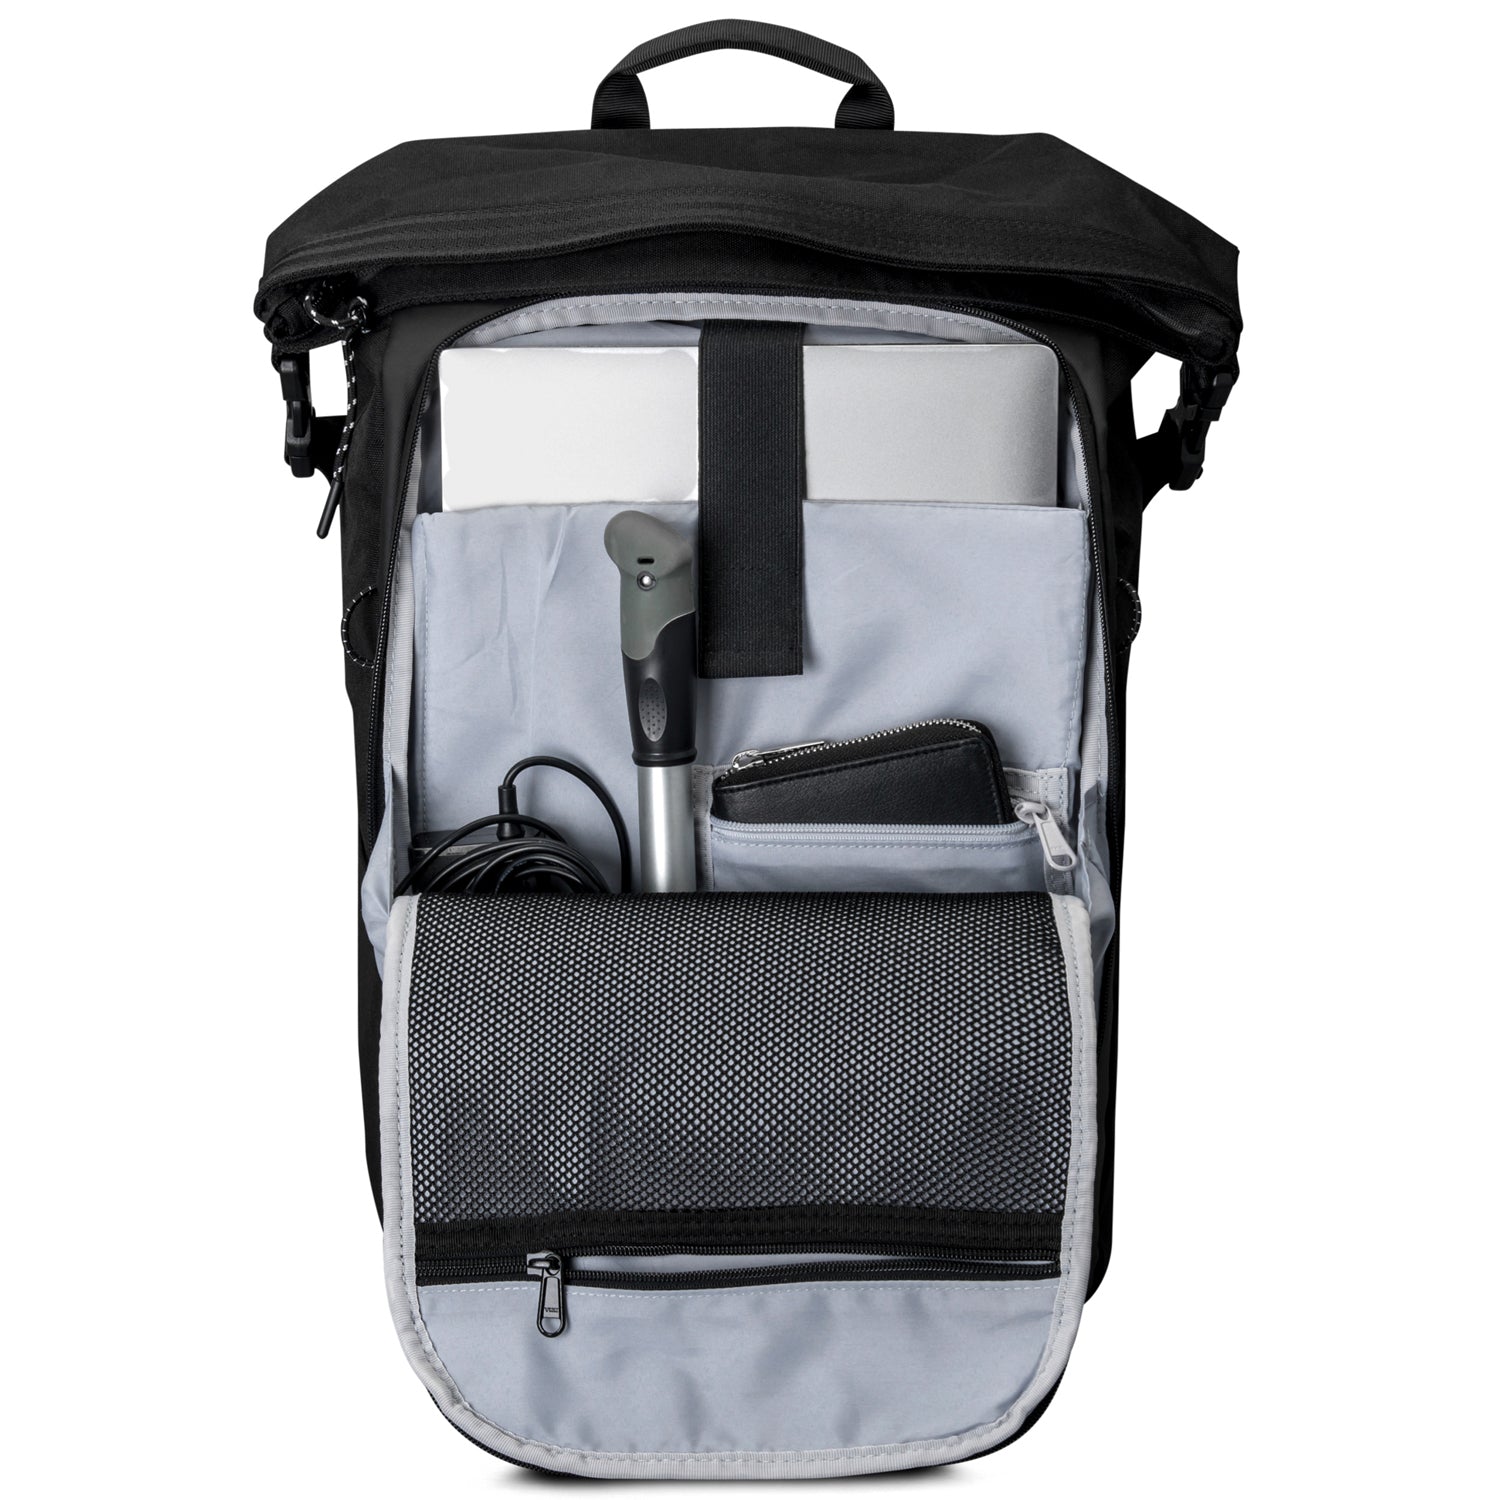 Sustainable 3 in 1 bike bag backpack combination IMPULS 3-1 | THOLLBECK